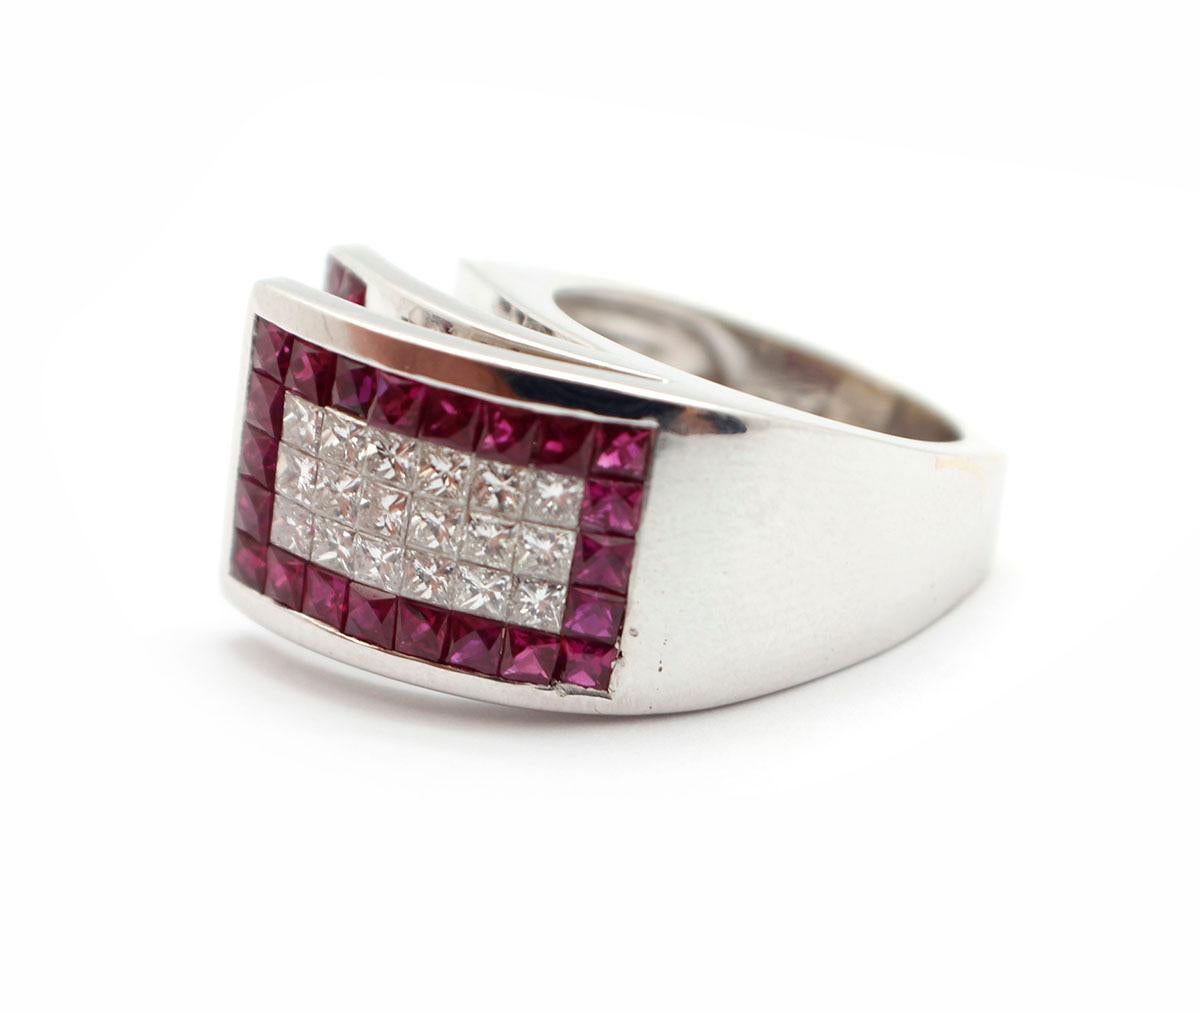 This fabulously modern band is designed in 18k white gold. The ring features invisible-set, princess-cut diamonds and square-cut rubies. The diamonds have a total weight of 0.90ct, and they are graded G-H in color and VS in clarity. The rubies have